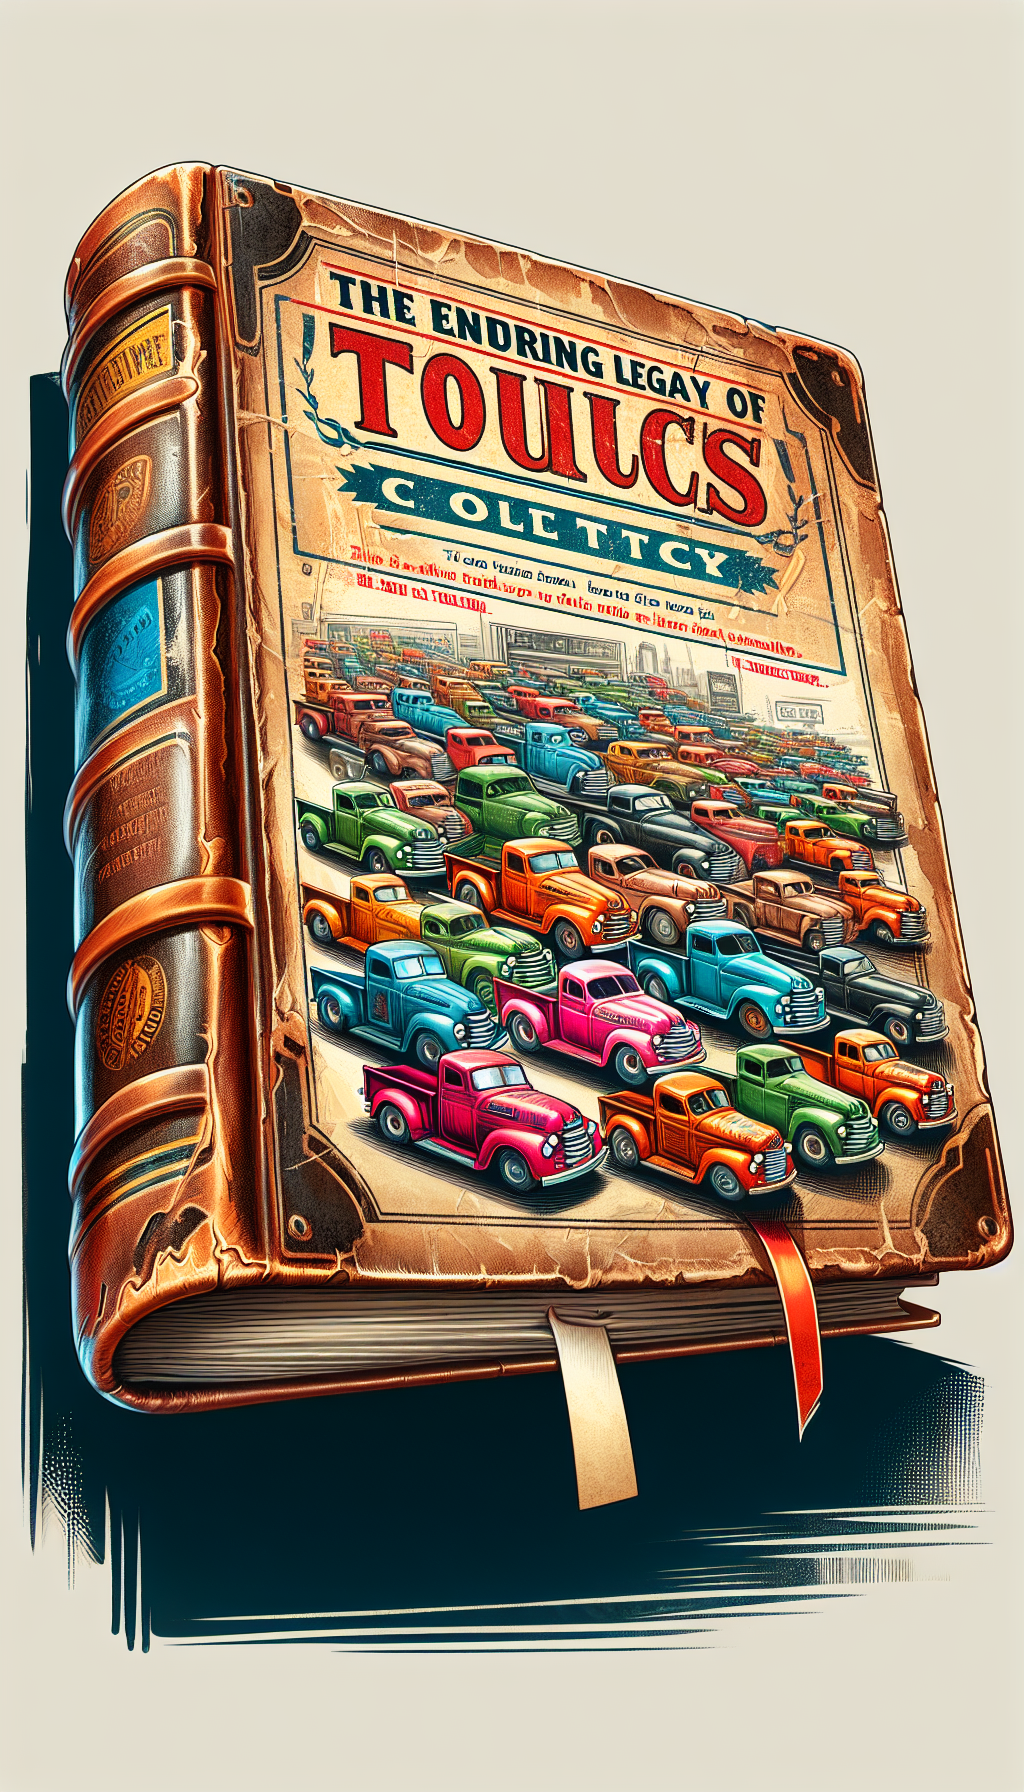 A vintage-style illustration depicts a worn, leather-bound book entitled "The Enduring Legacy of Tonka," resting on a pedestal. Nestled within its open pages is a vibrant, colorful scene of pristine, classic Tonka trucks of various models lined up as if on display in a collector's cabinet, with price tags indicative of their high value dangling from their metal frames.